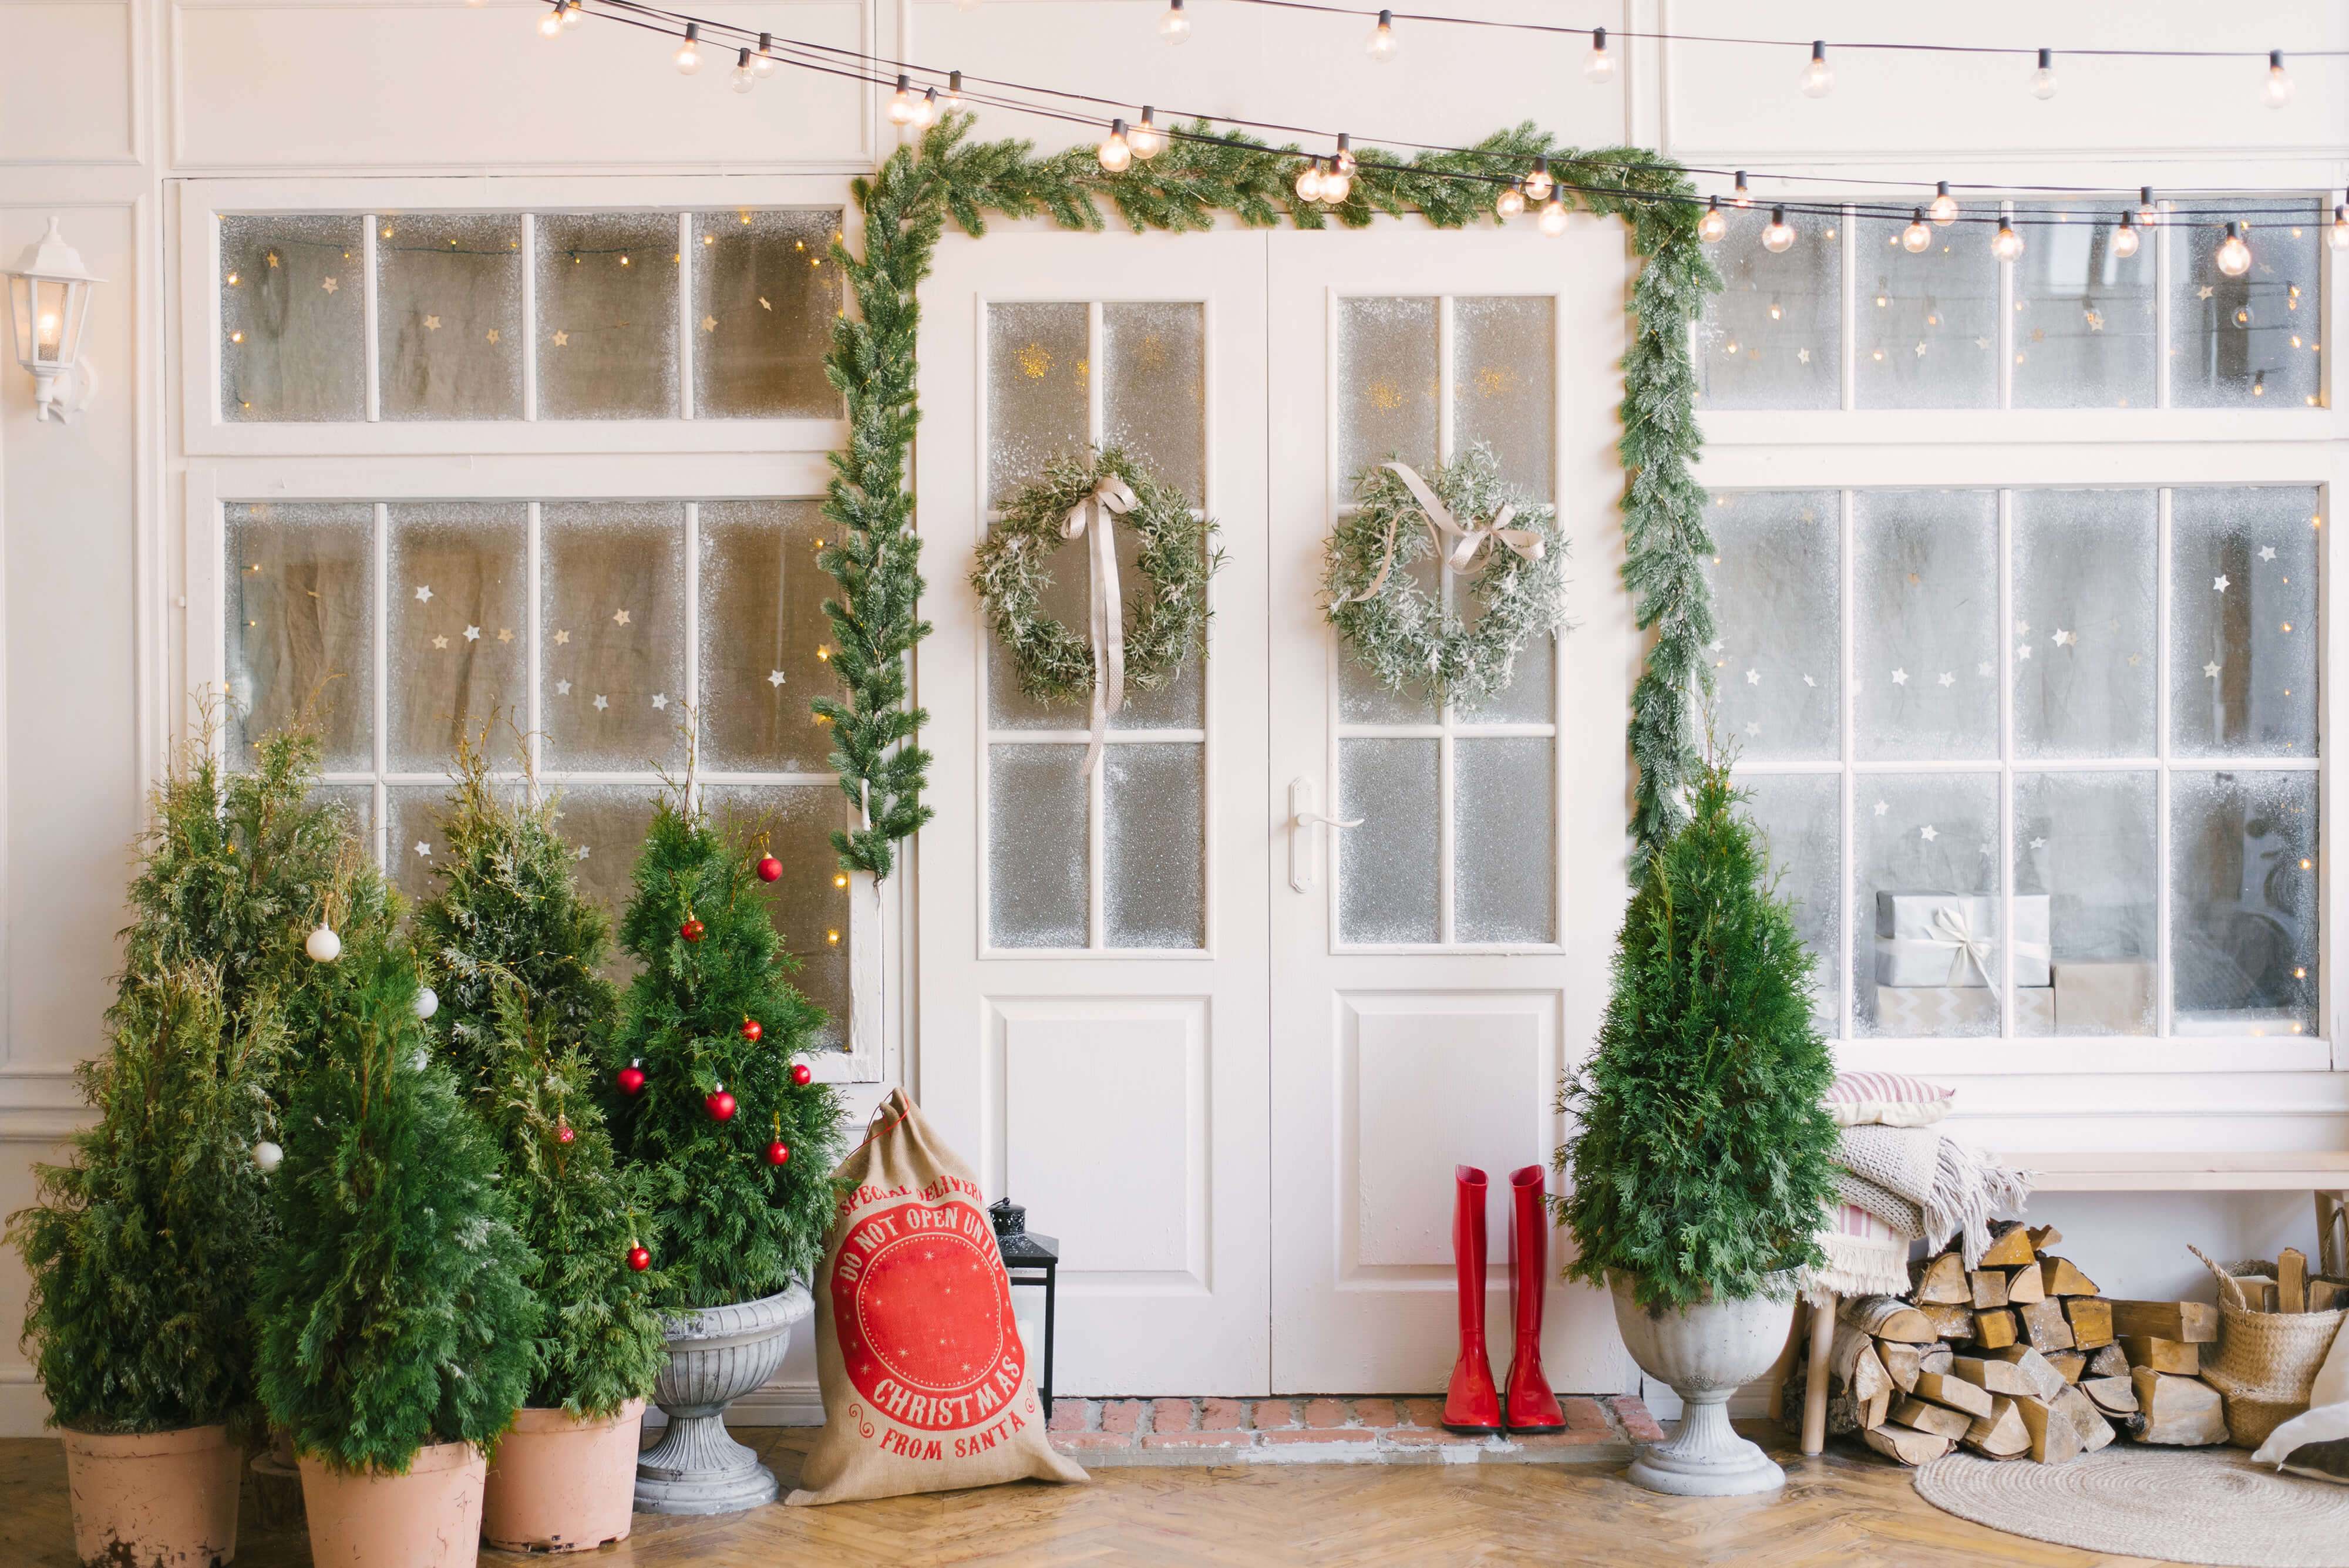 How To Paint Windows To Decorate For The Holidays